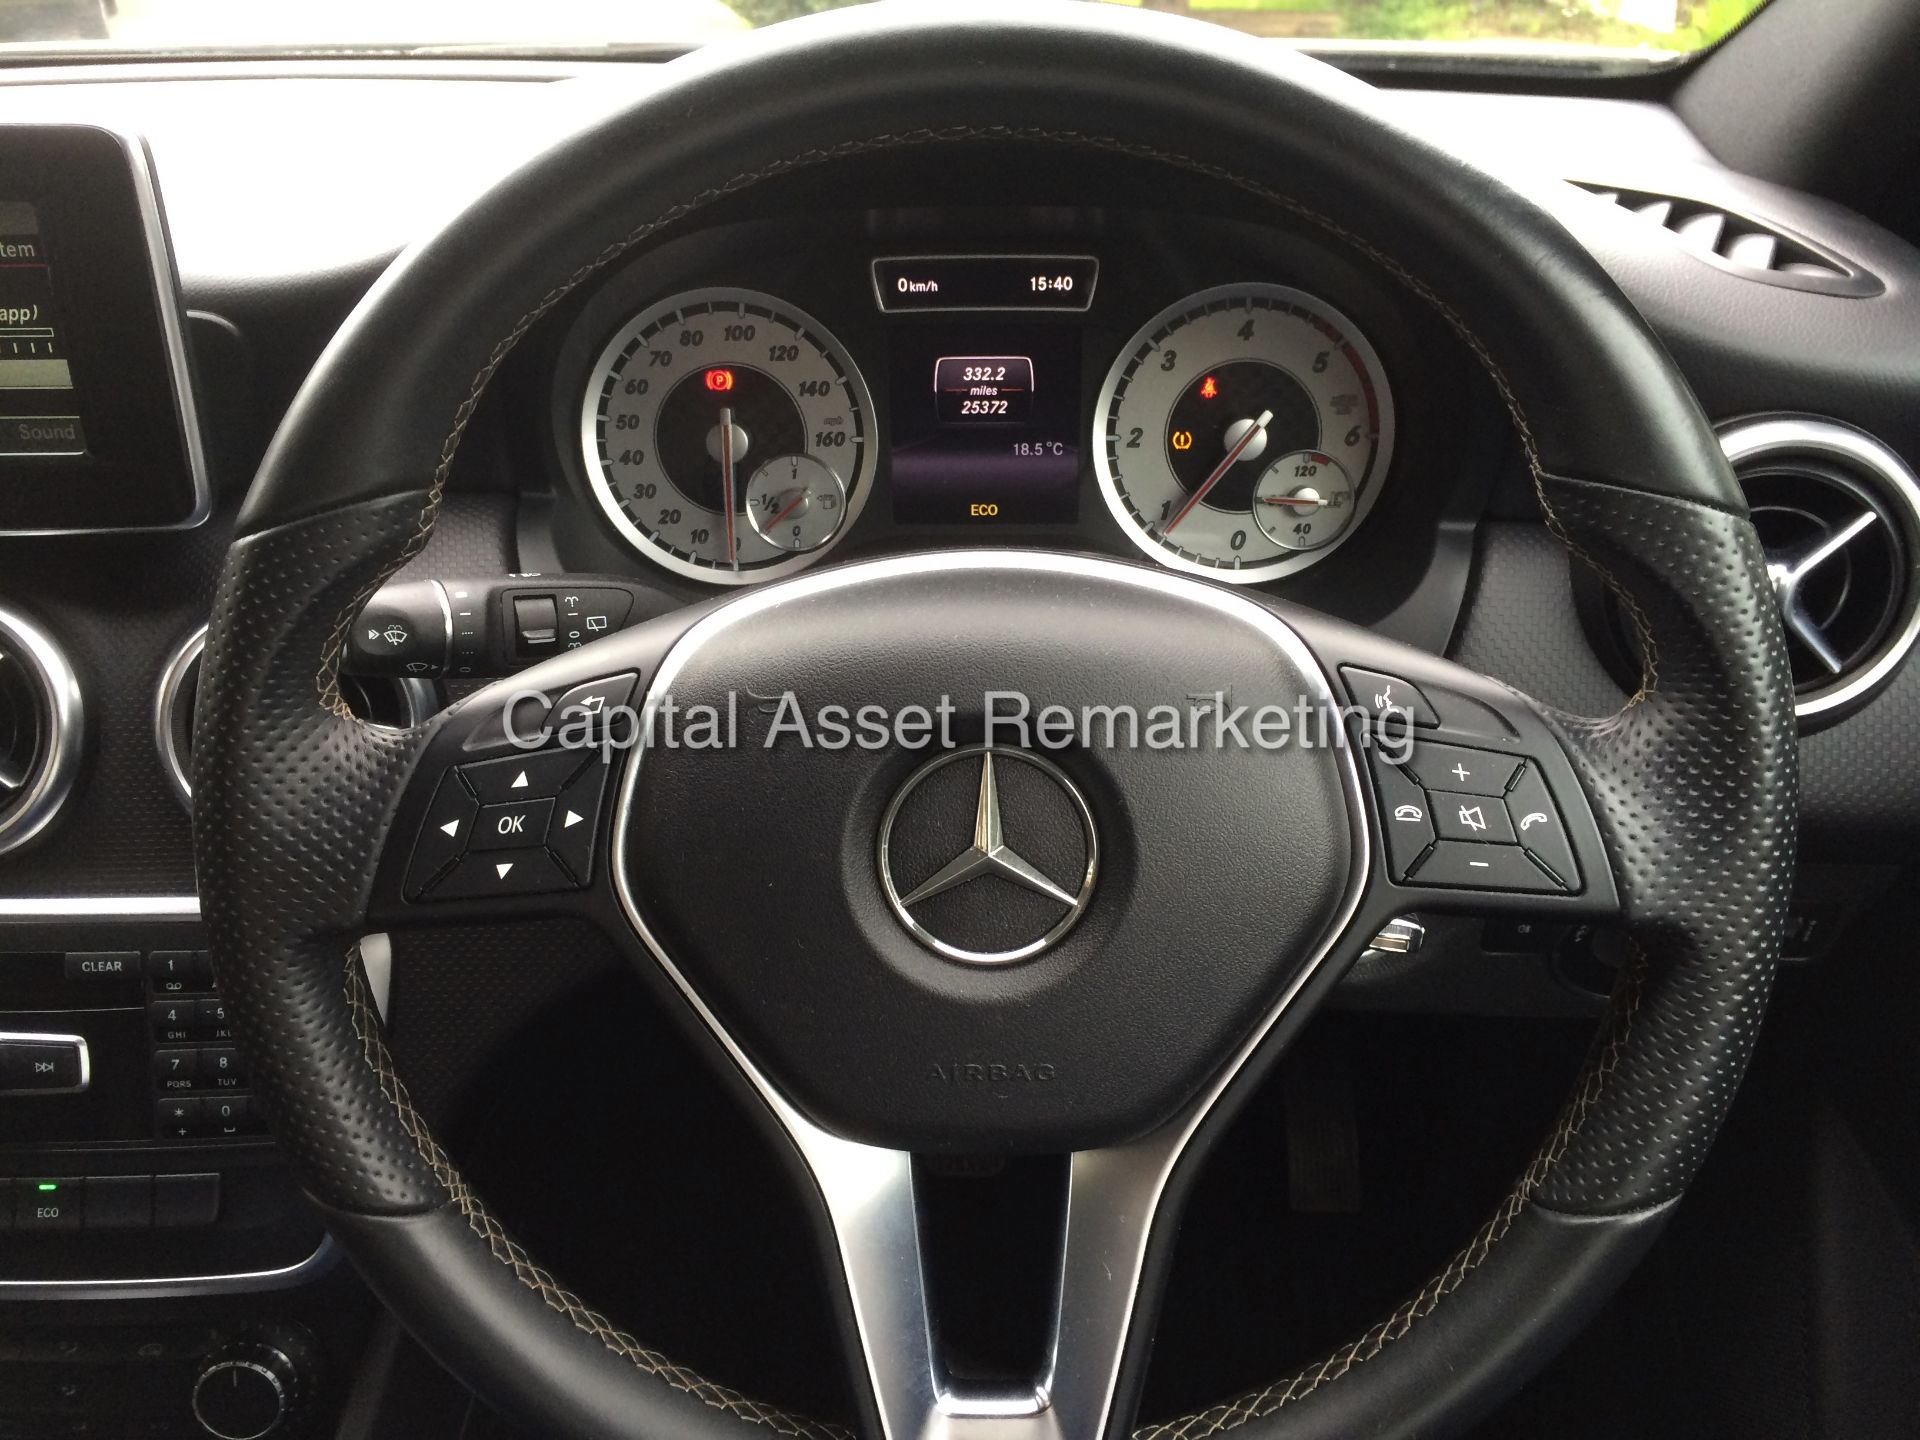 (On Sale) MERCEDES A180cdi "SPORT EDITION" (2015 MODEL) ONLY 25,000 MILES - SAT NAV -PARTIAL LEATHER - Image 15 of 18